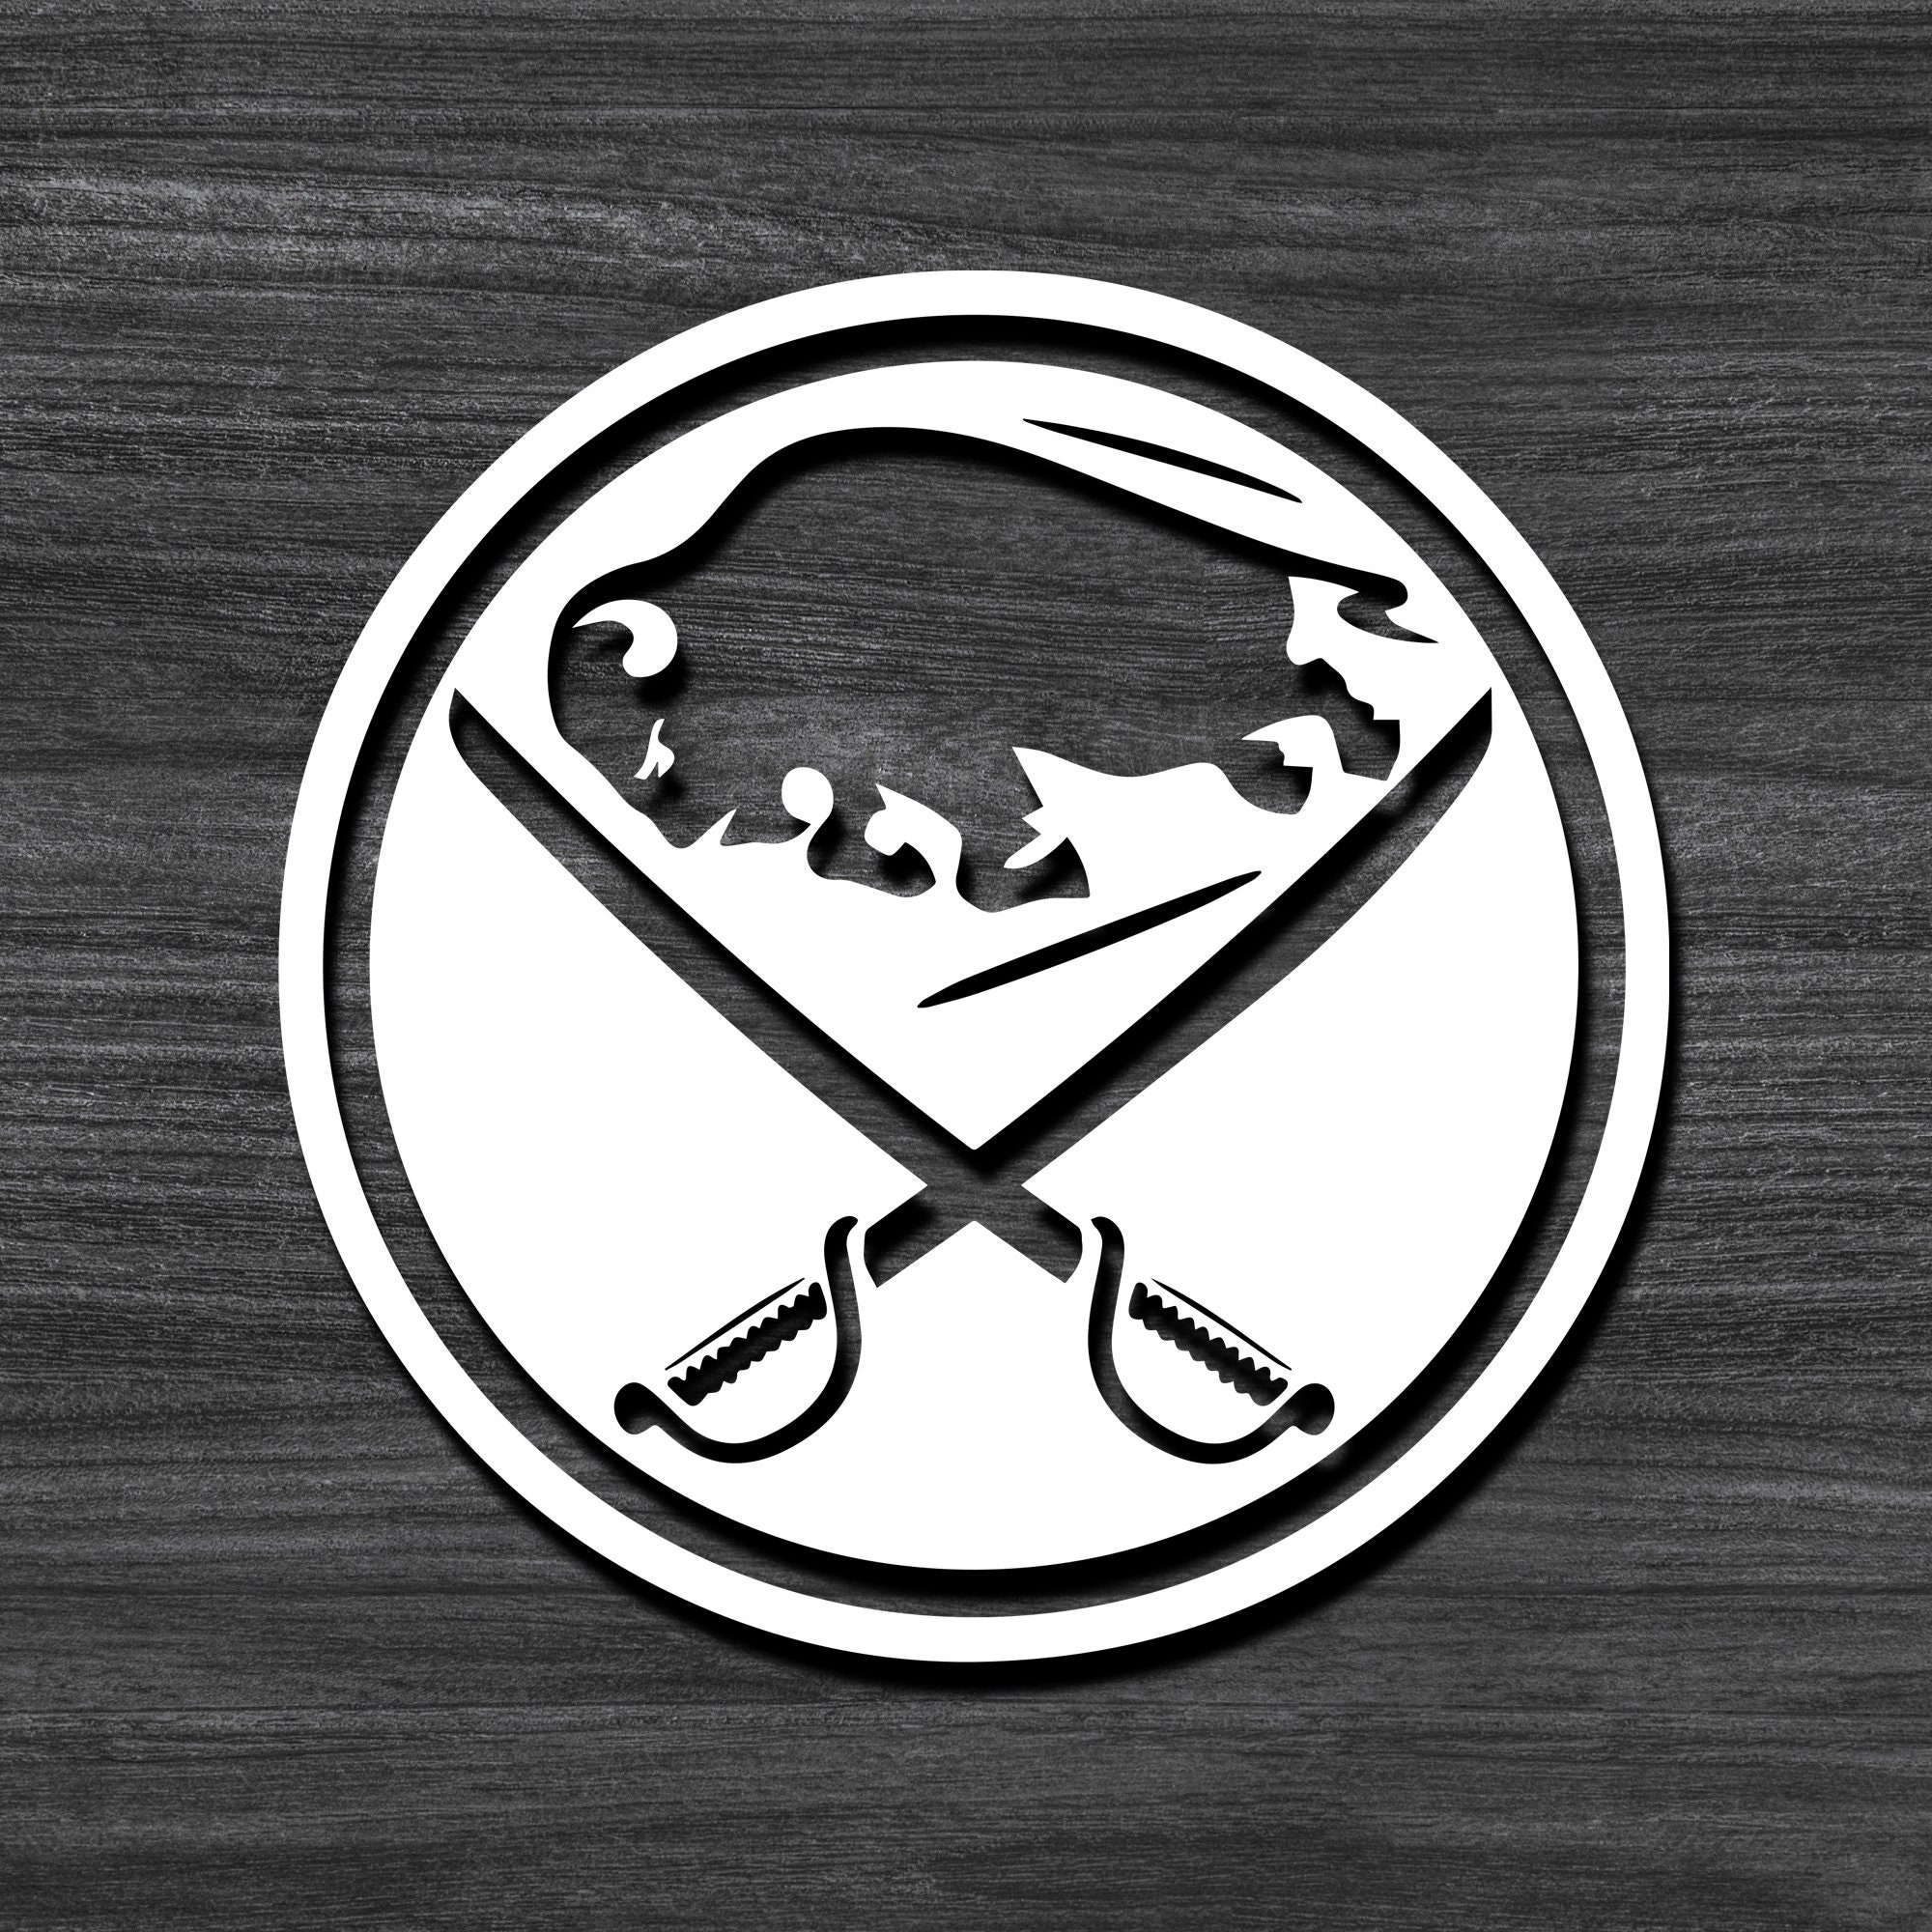 Buffalo Sabres goat head Reusable Static Cling Window Decal